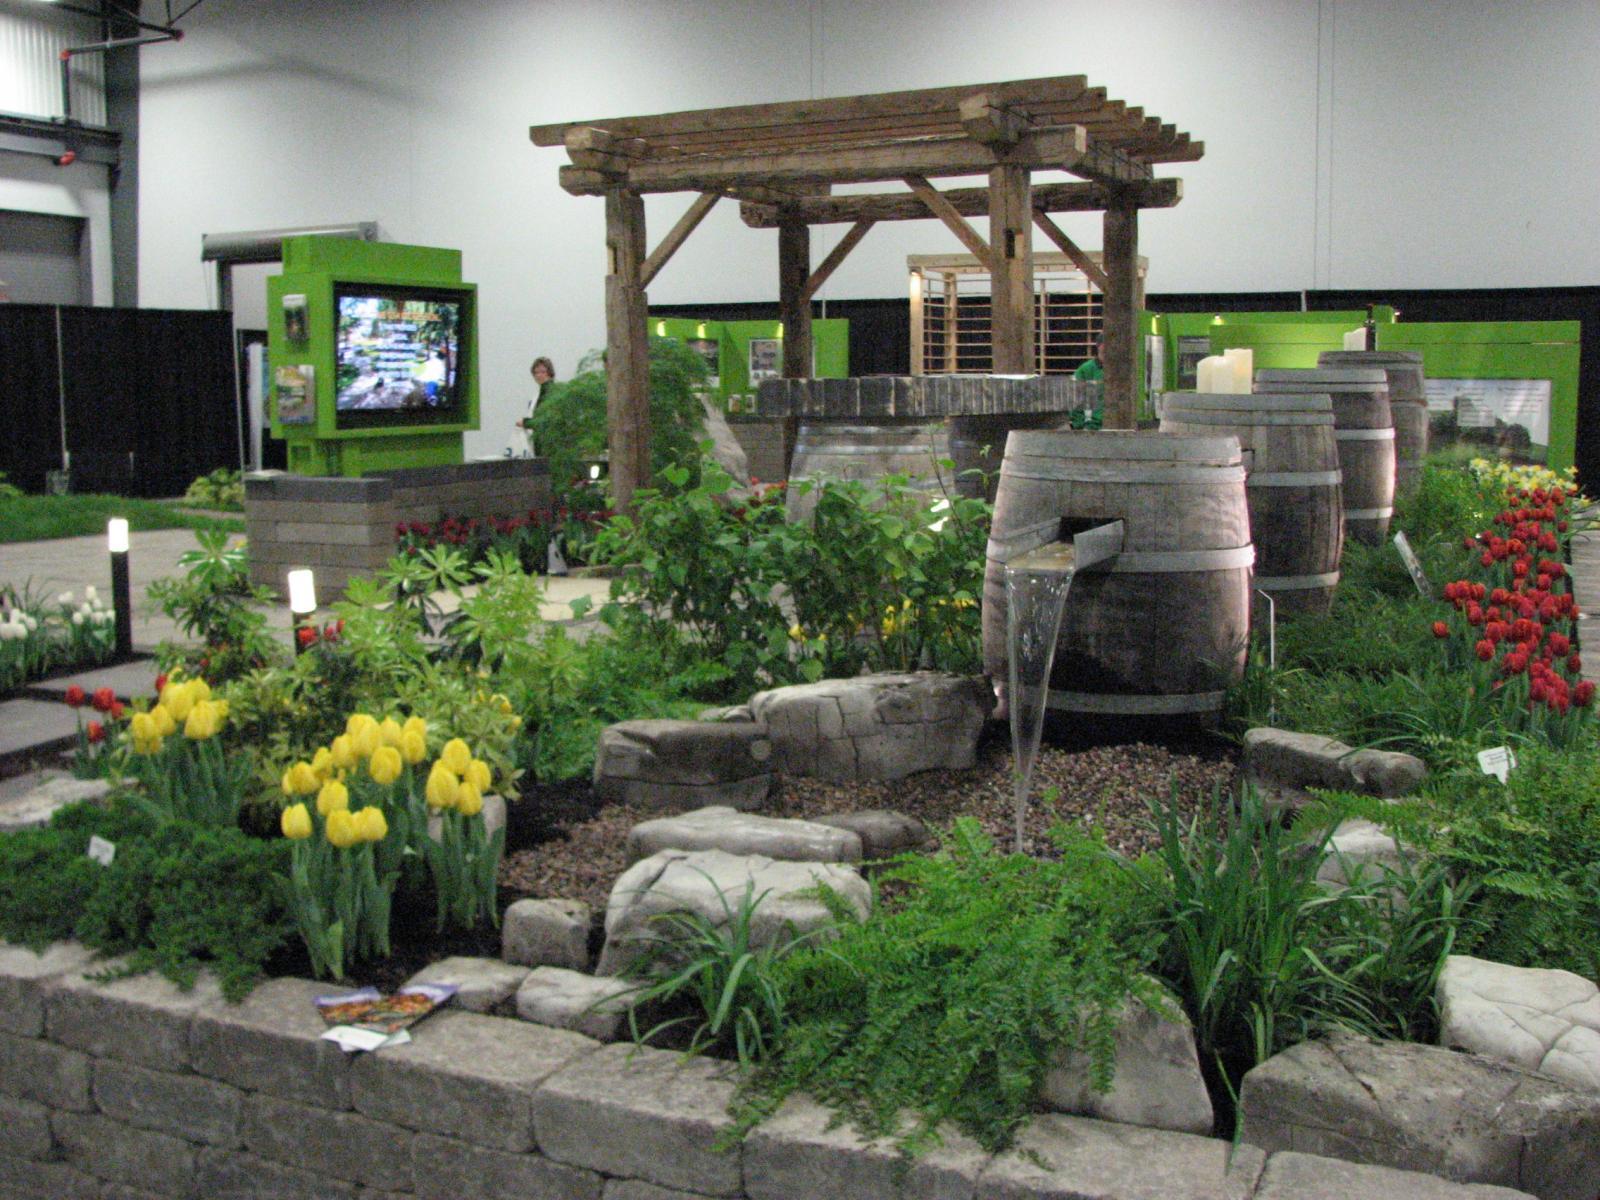 Ottawa Chapter Meeting at Living Landscapes March 21 10:00 am - 12:00 Noon Register today